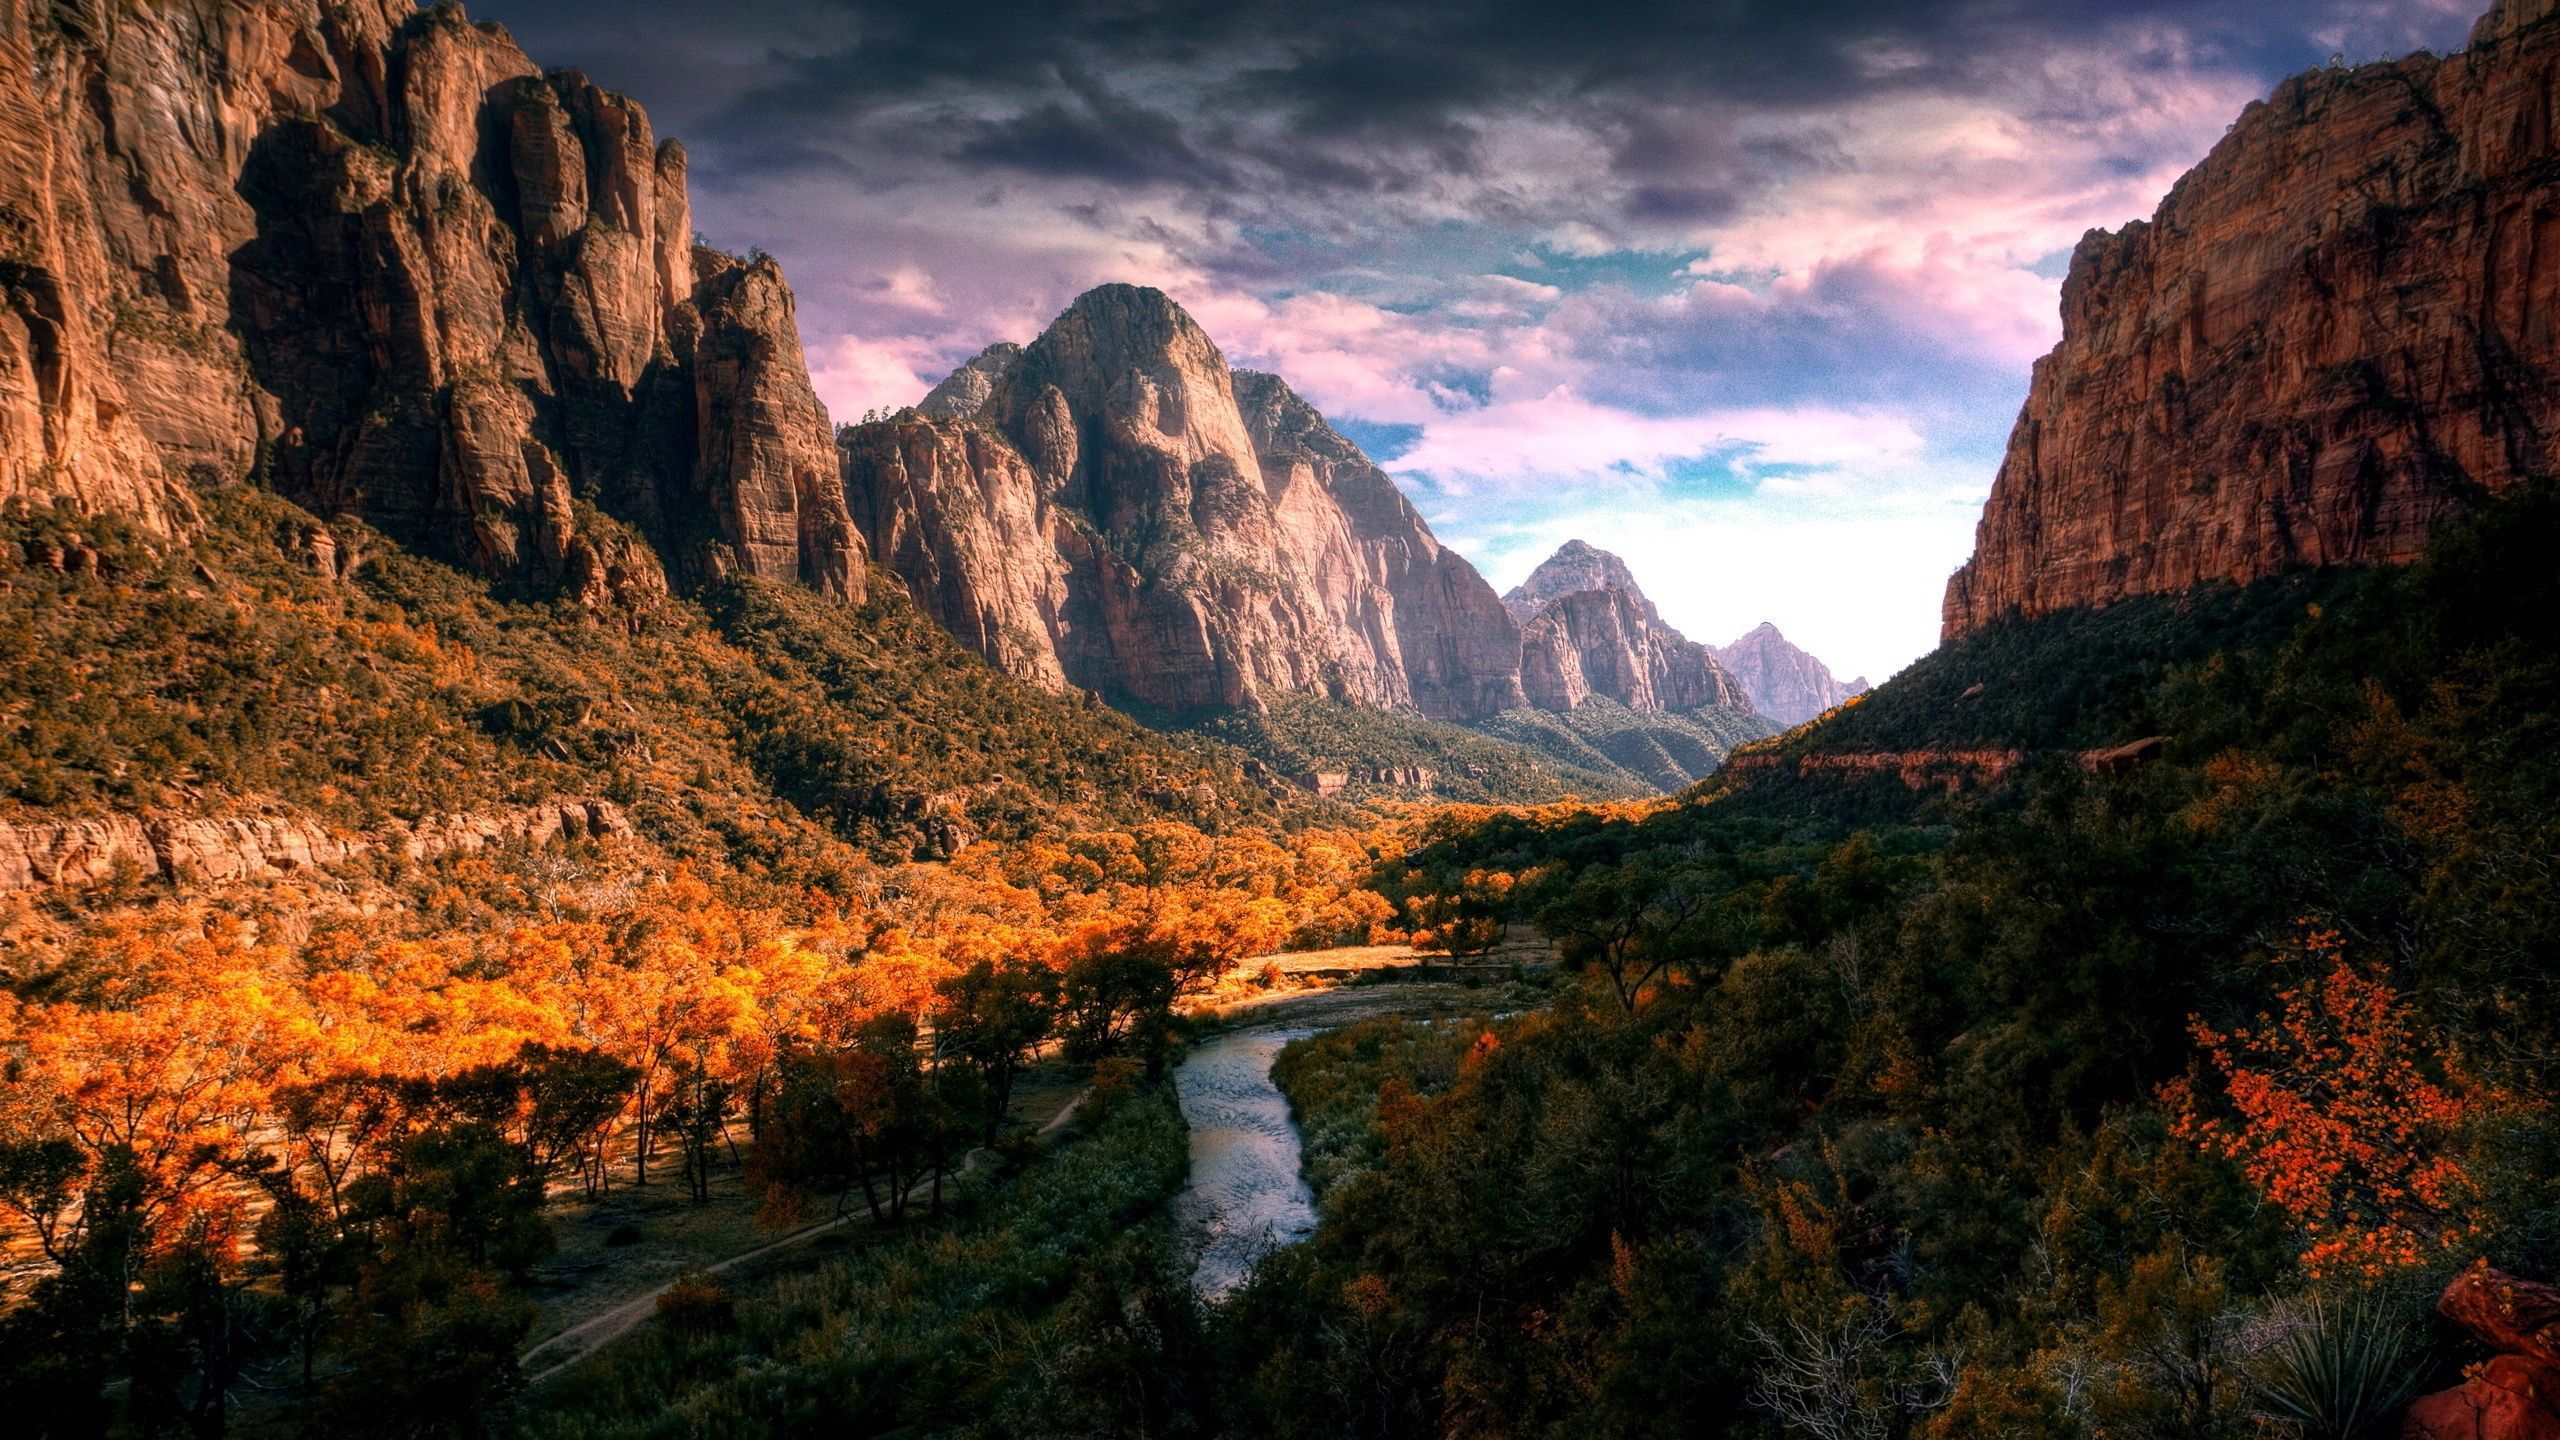 river valley pics. Valley river autumn Wallpaper in 2560x1440